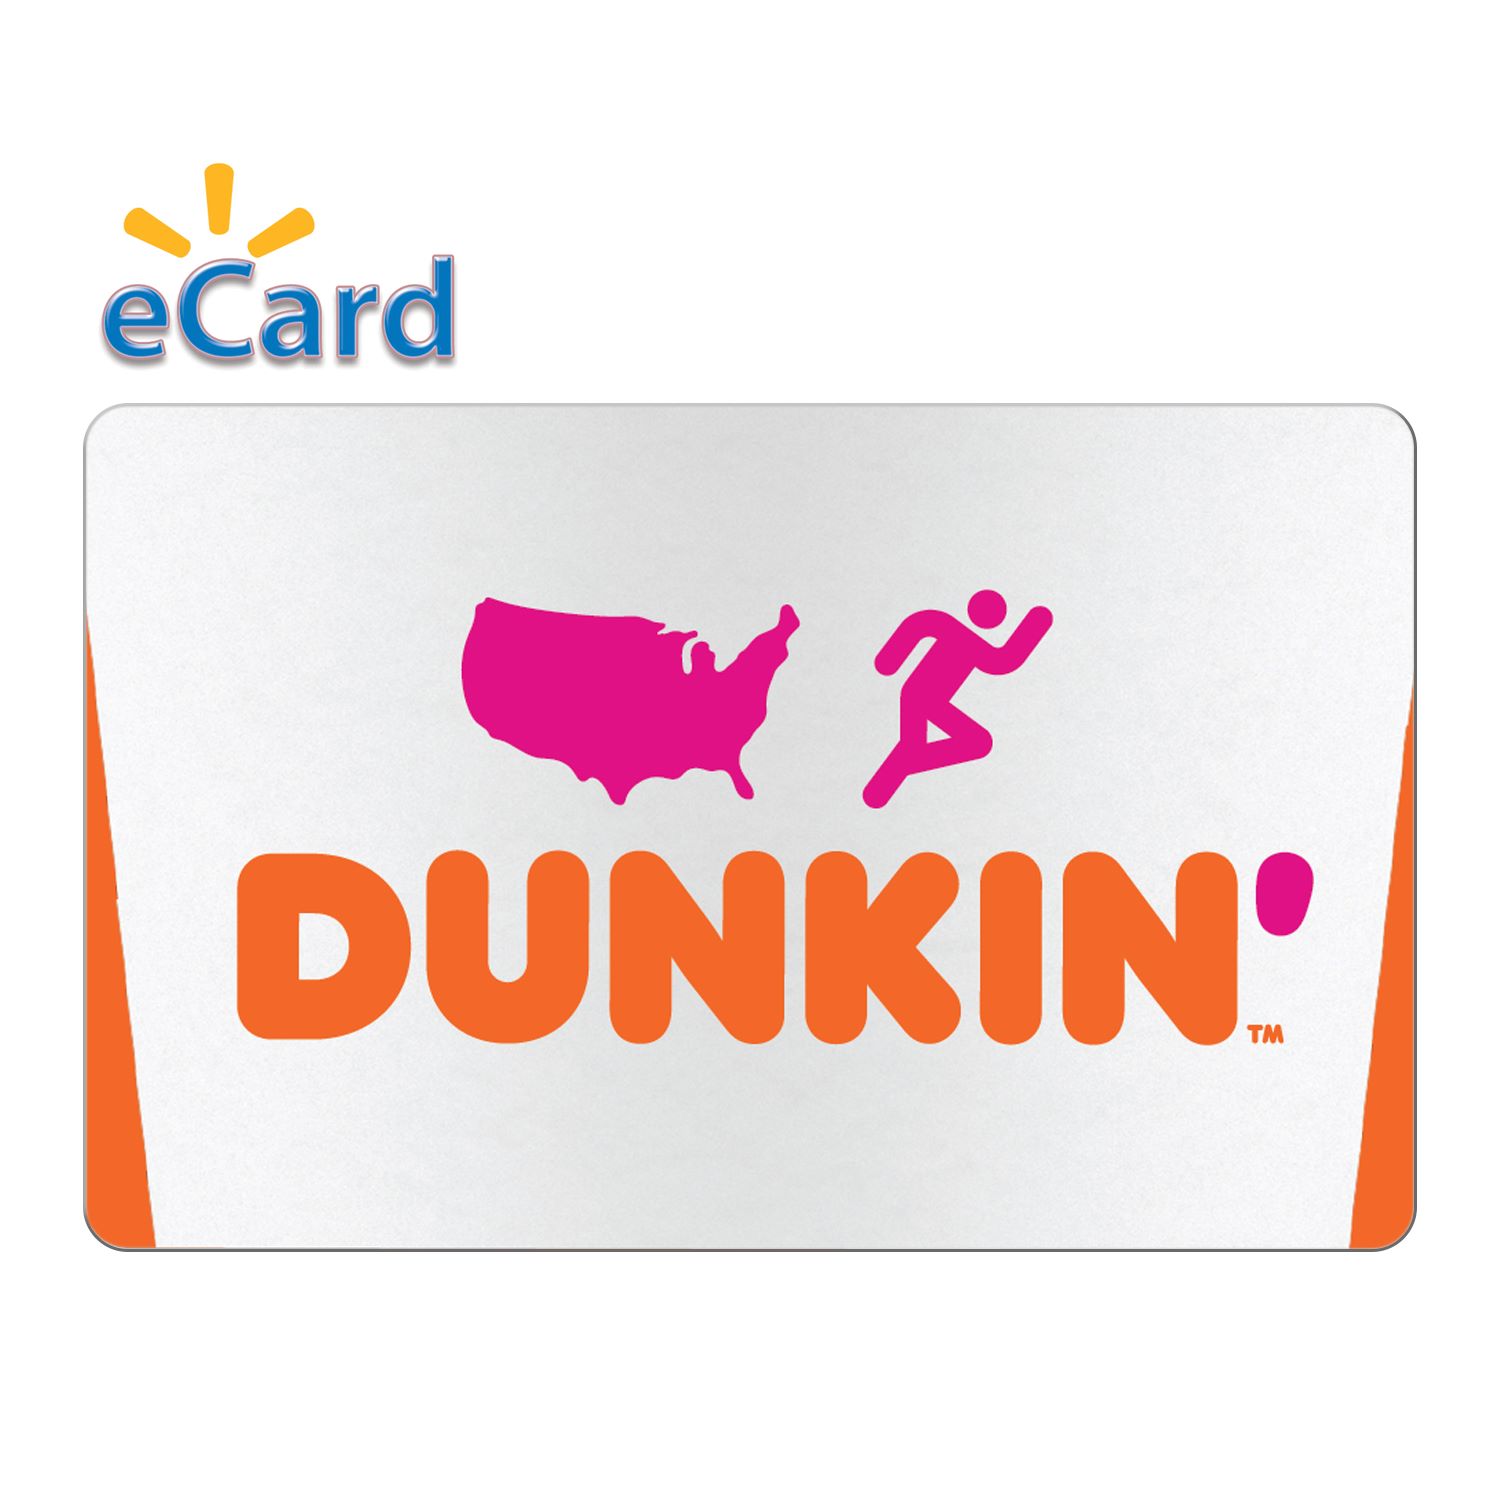 Dunkin Donuts $50 eGift Card - image 1 of 2